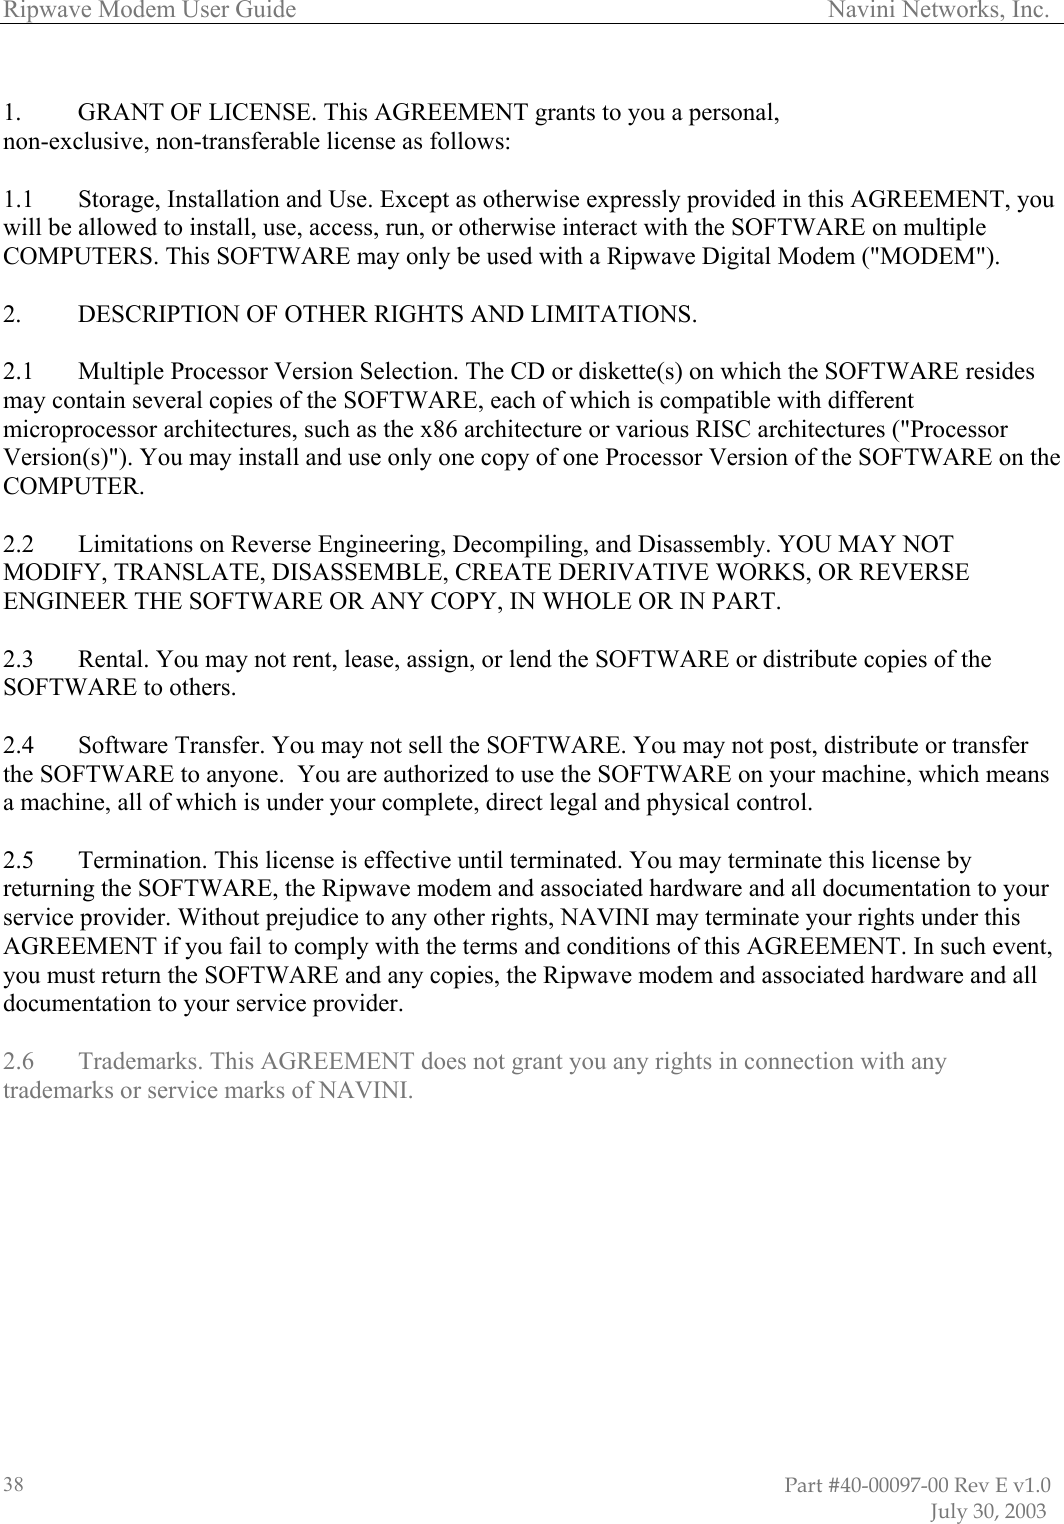 Ripwave Modem User Guide                                                                                     Navini Networks, Inc.                                                                                                                         Part #40-00097-00 Rev E v1.0                               July 30, 2003 38 1.  GRANT OF LICENSE. This AGREEMENT grants to you a personal,  non-exclusive, non-transferable license as follows:   1.1  Storage, Installation and Use. Except as otherwise expressly provided in this AGREEMENT, you will be allowed to install, use, access, run, or otherwise interact with the SOFTWARE on multiple COMPUTERS. This SOFTWARE may only be used with a Ripwave Digital Modem (&quot;MODEM&quot;).  2.   DESCRIPTION OF OTHER RIGHTS AND LIMITATIONS.   2.1   Multiple Processor Version Selection. The CD or diskette(s) on which the SOFTWARE resides may contain several copies of the SOFTWARE, each of which is compatible with different microprocessor architectures, such as the x86 architecture or various RISC architectures (&quot;Processor Version(s)&quot;). You may install and use only one copy of one Processor Version of the SOFTWARE on the COMPUTER.  2.2   Limitations on Reverse Engineering, Decompiling, and Disassembly. YOU MAY NOT MODIFY, TRANSLATE, DISASSEMBLE, CREATE DERIVATIVE WORKS, OR REVERSE ENGINEER THE SOFTWARE OR ANY COPY, IN WHOLE OR IN PART.  2.3   Rental. You may not rent, lease, assign, or lend the SOFTWARE or distribute copies of the SOFTWARE to others.  2.4   Software Transfer. You may not sell the SOFTWARE. You may not post, distribute or transfer the SOFTWARE to anyone.  You are authorized to use the SOFTWARE on your machine, which means a machine, all of which is under your complete, direct legal and physical control.  2.5   Termination. This license is effective until terminated. You may terminate this license by returning the SOFTWARE, the Ripwave modem and associated hardware and all documentation to your service provider. Without prejudice to any other rights, NAVINI may terminate your rights under this AGREEMENT if you fail to comply with the terms and conditions of this AGREEMENT. In such event, you must return the SOFTWARE and any copies, the Ripwave modem and associated hardware and all documentation to your service provider.  2.6  Trademarks. This AGREEMENT does not grant you any rights in connection with any trademarks or service marks of NAVINI.  